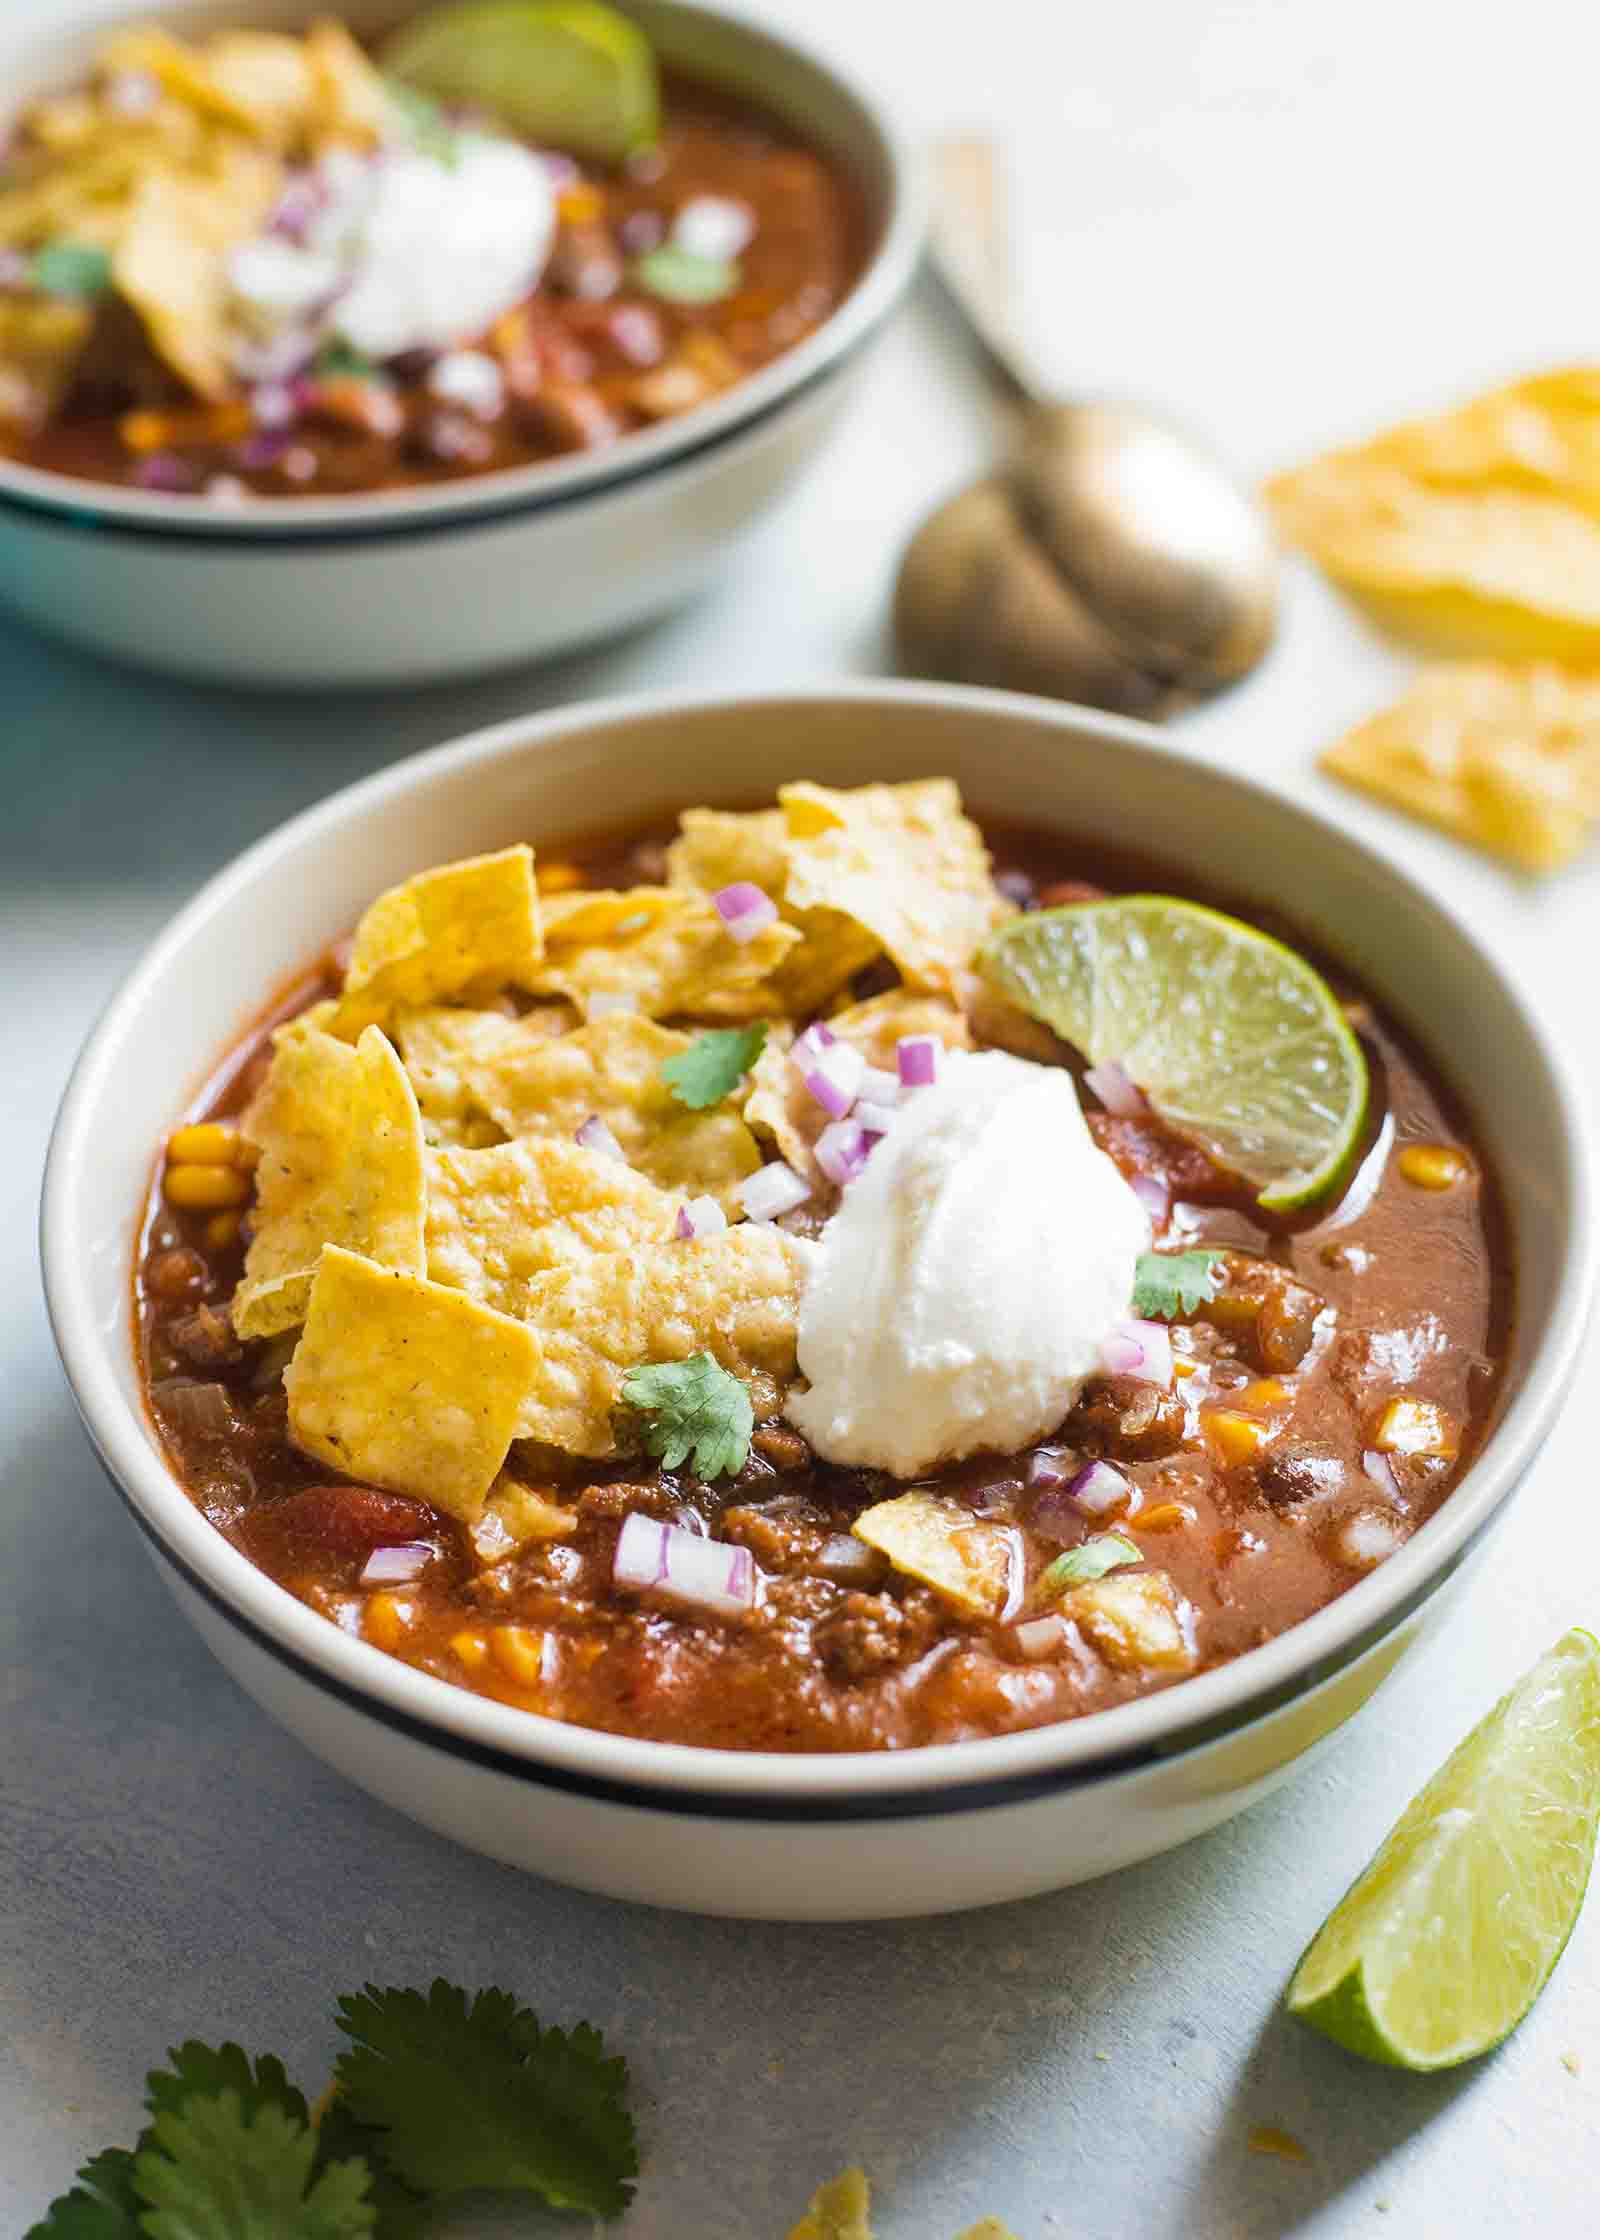 Crockpot taco soup made with beans, ground beef, beans, and corn, and topped with tortilla chips, sour cream, and lime wedges.